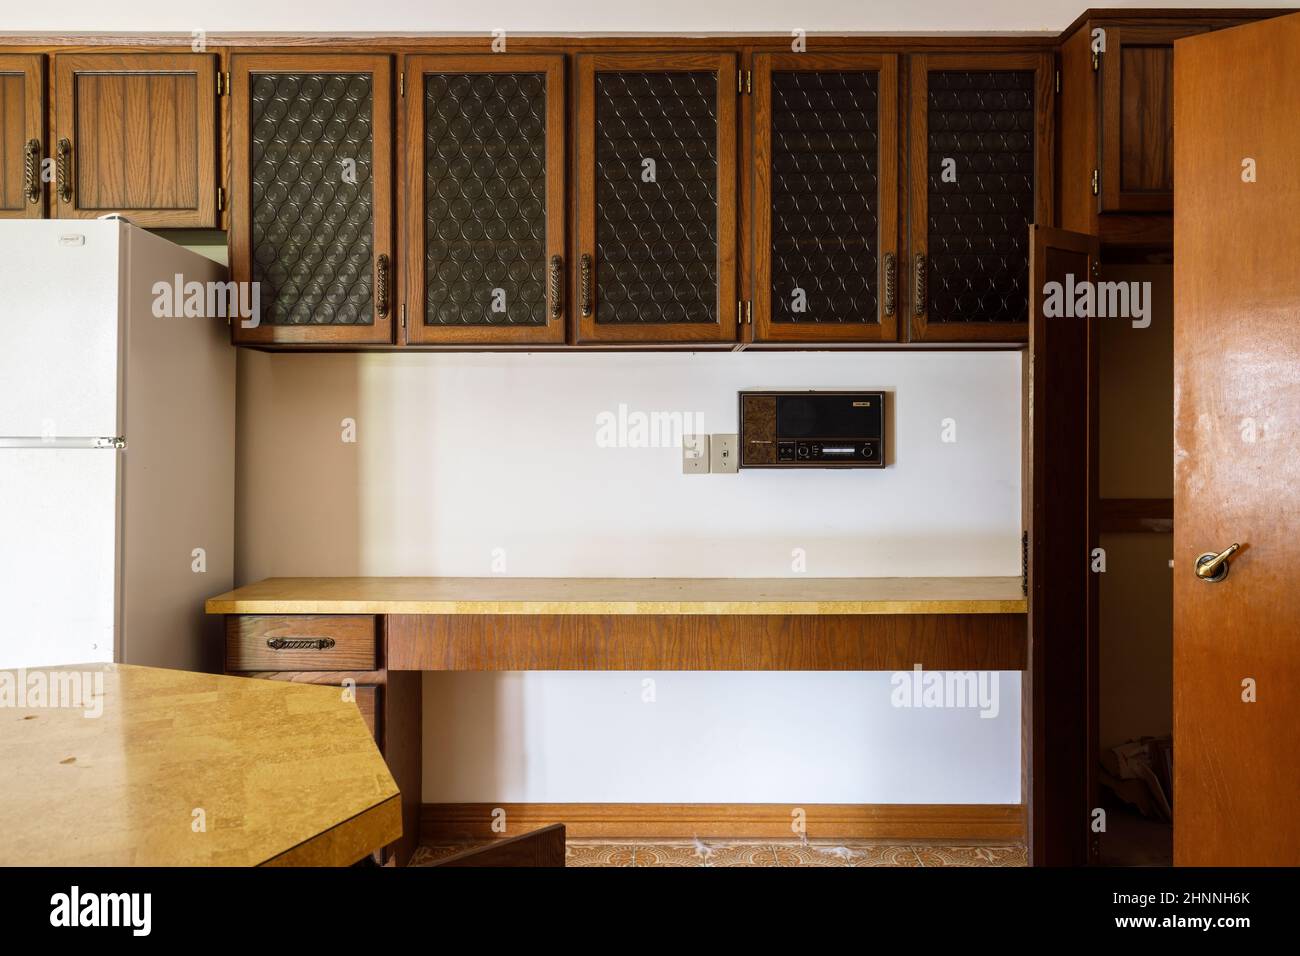 A 1950s kitchen with yellow counter tops and modern appliances. Stock Photo